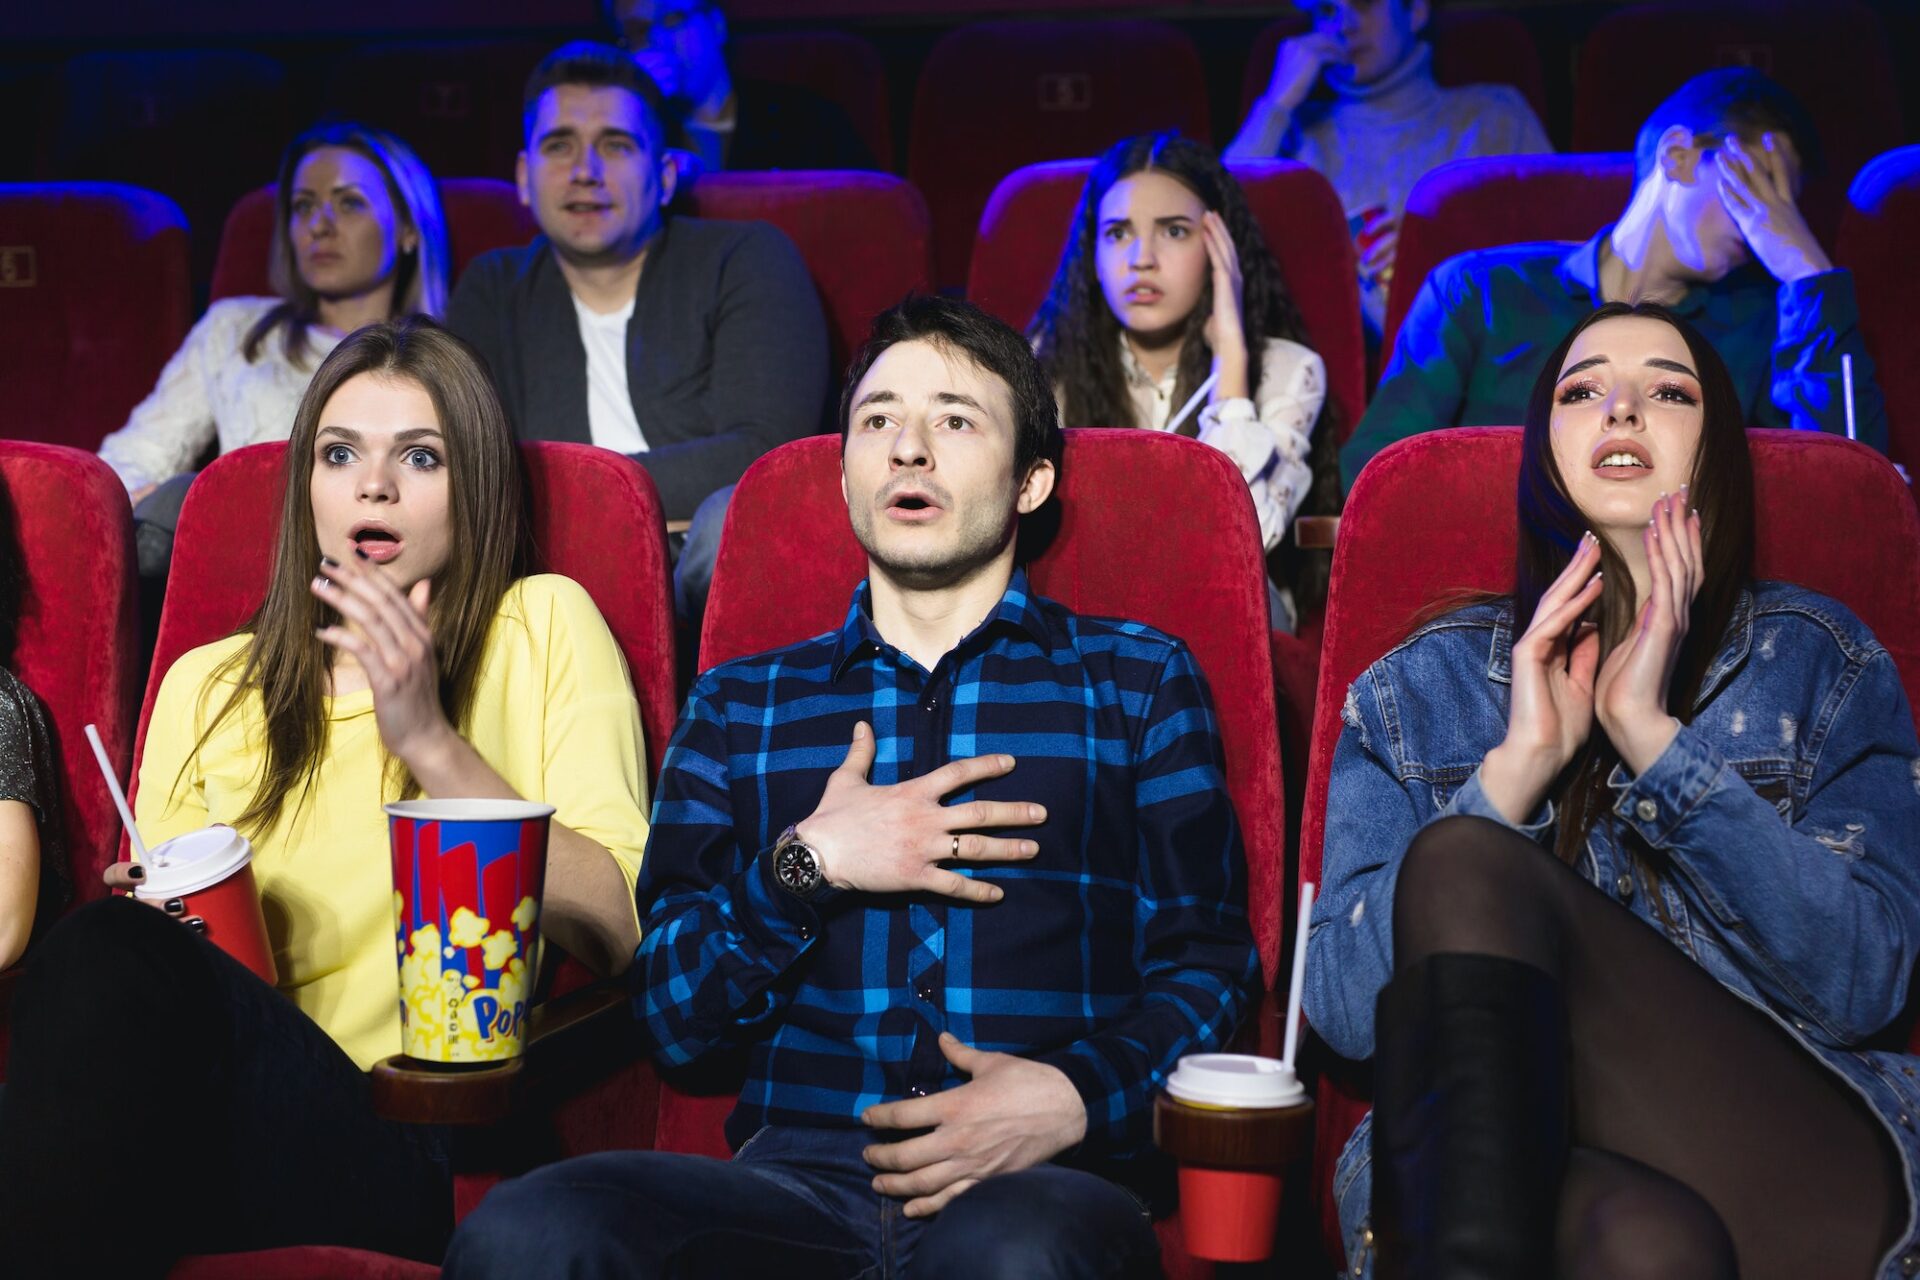 Group of people watch a horror movie at the cinema